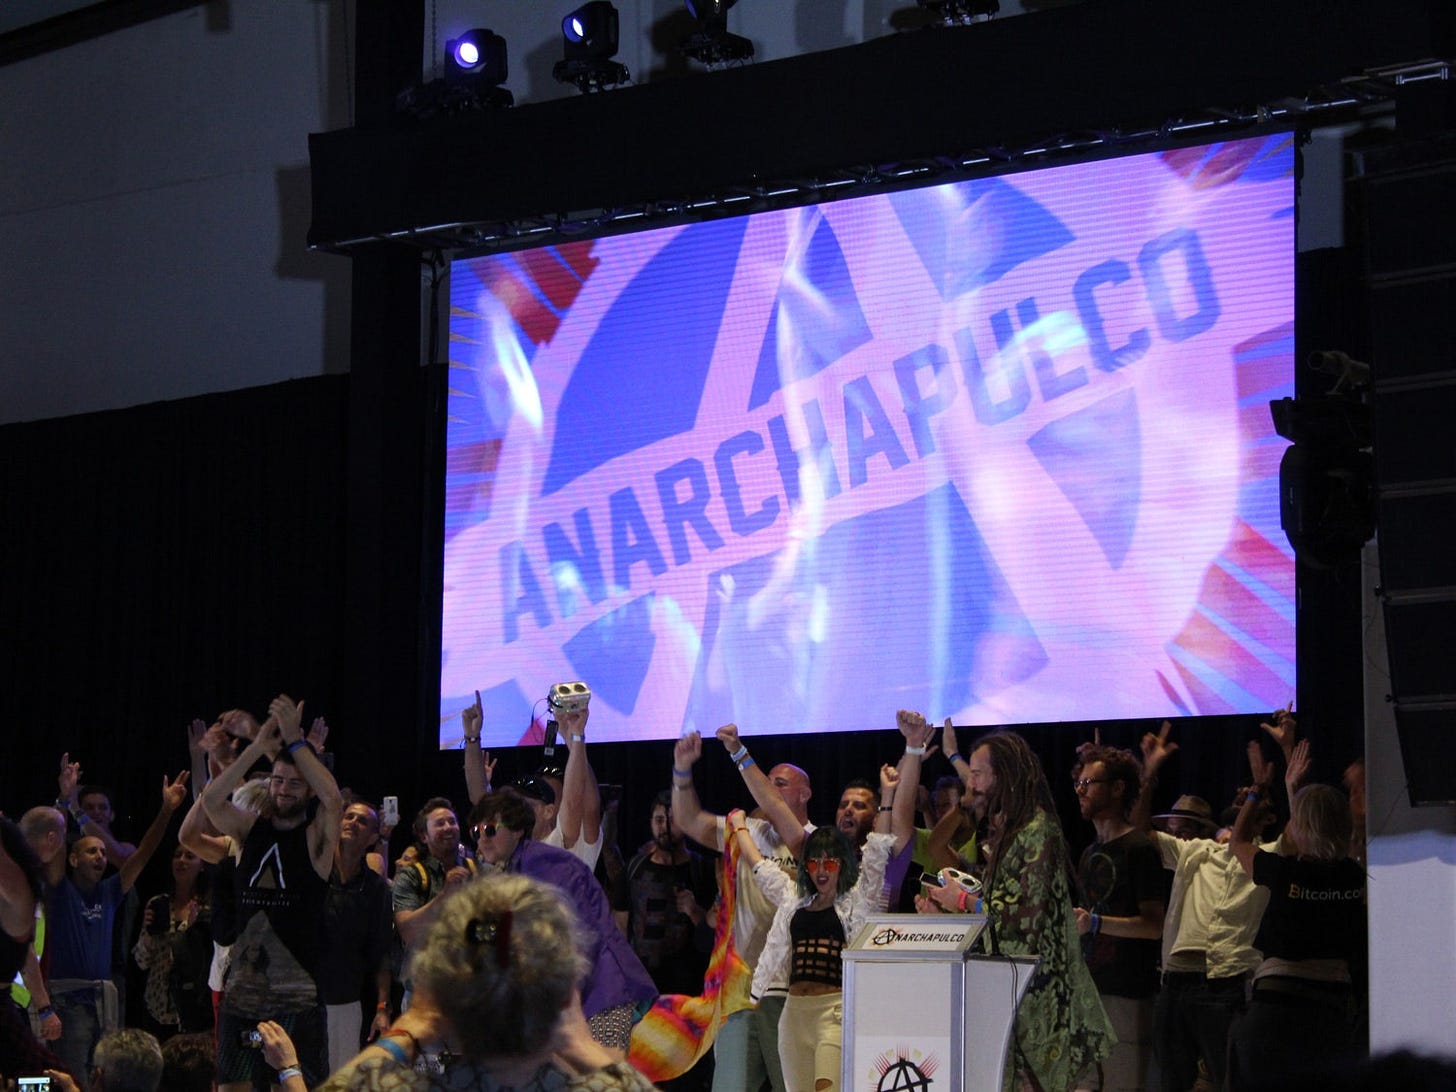 Crowd of attendees at Anarchapulco with their hands in the air. Anarchy symbol and text Anarchapulco displayed on giant...